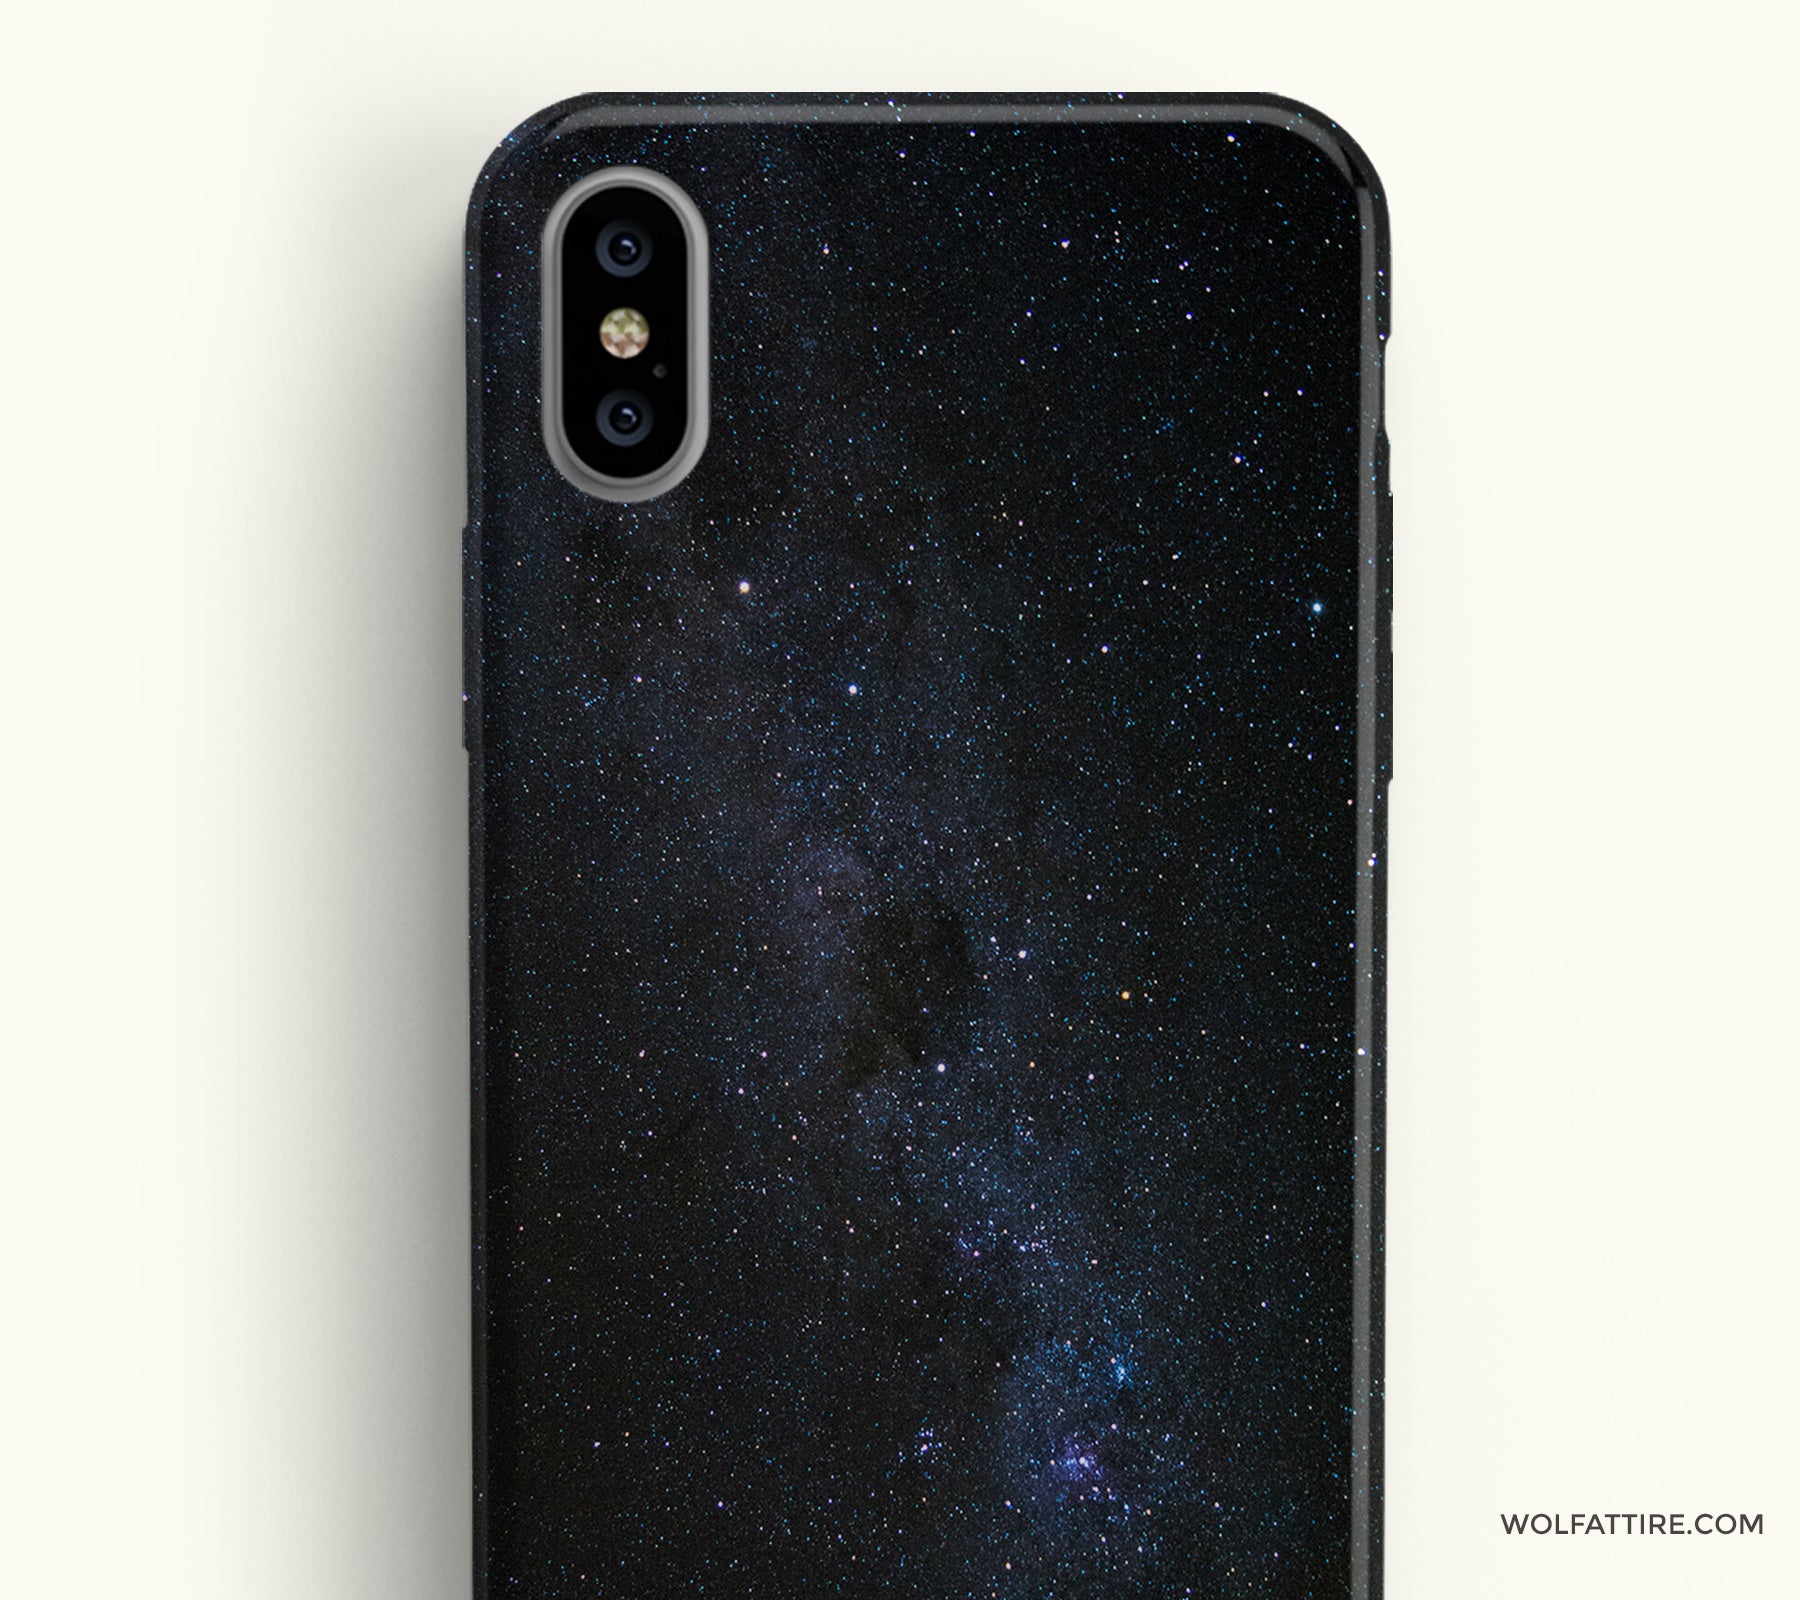 Galaxy iphone x covers and cases online india - wolfattire